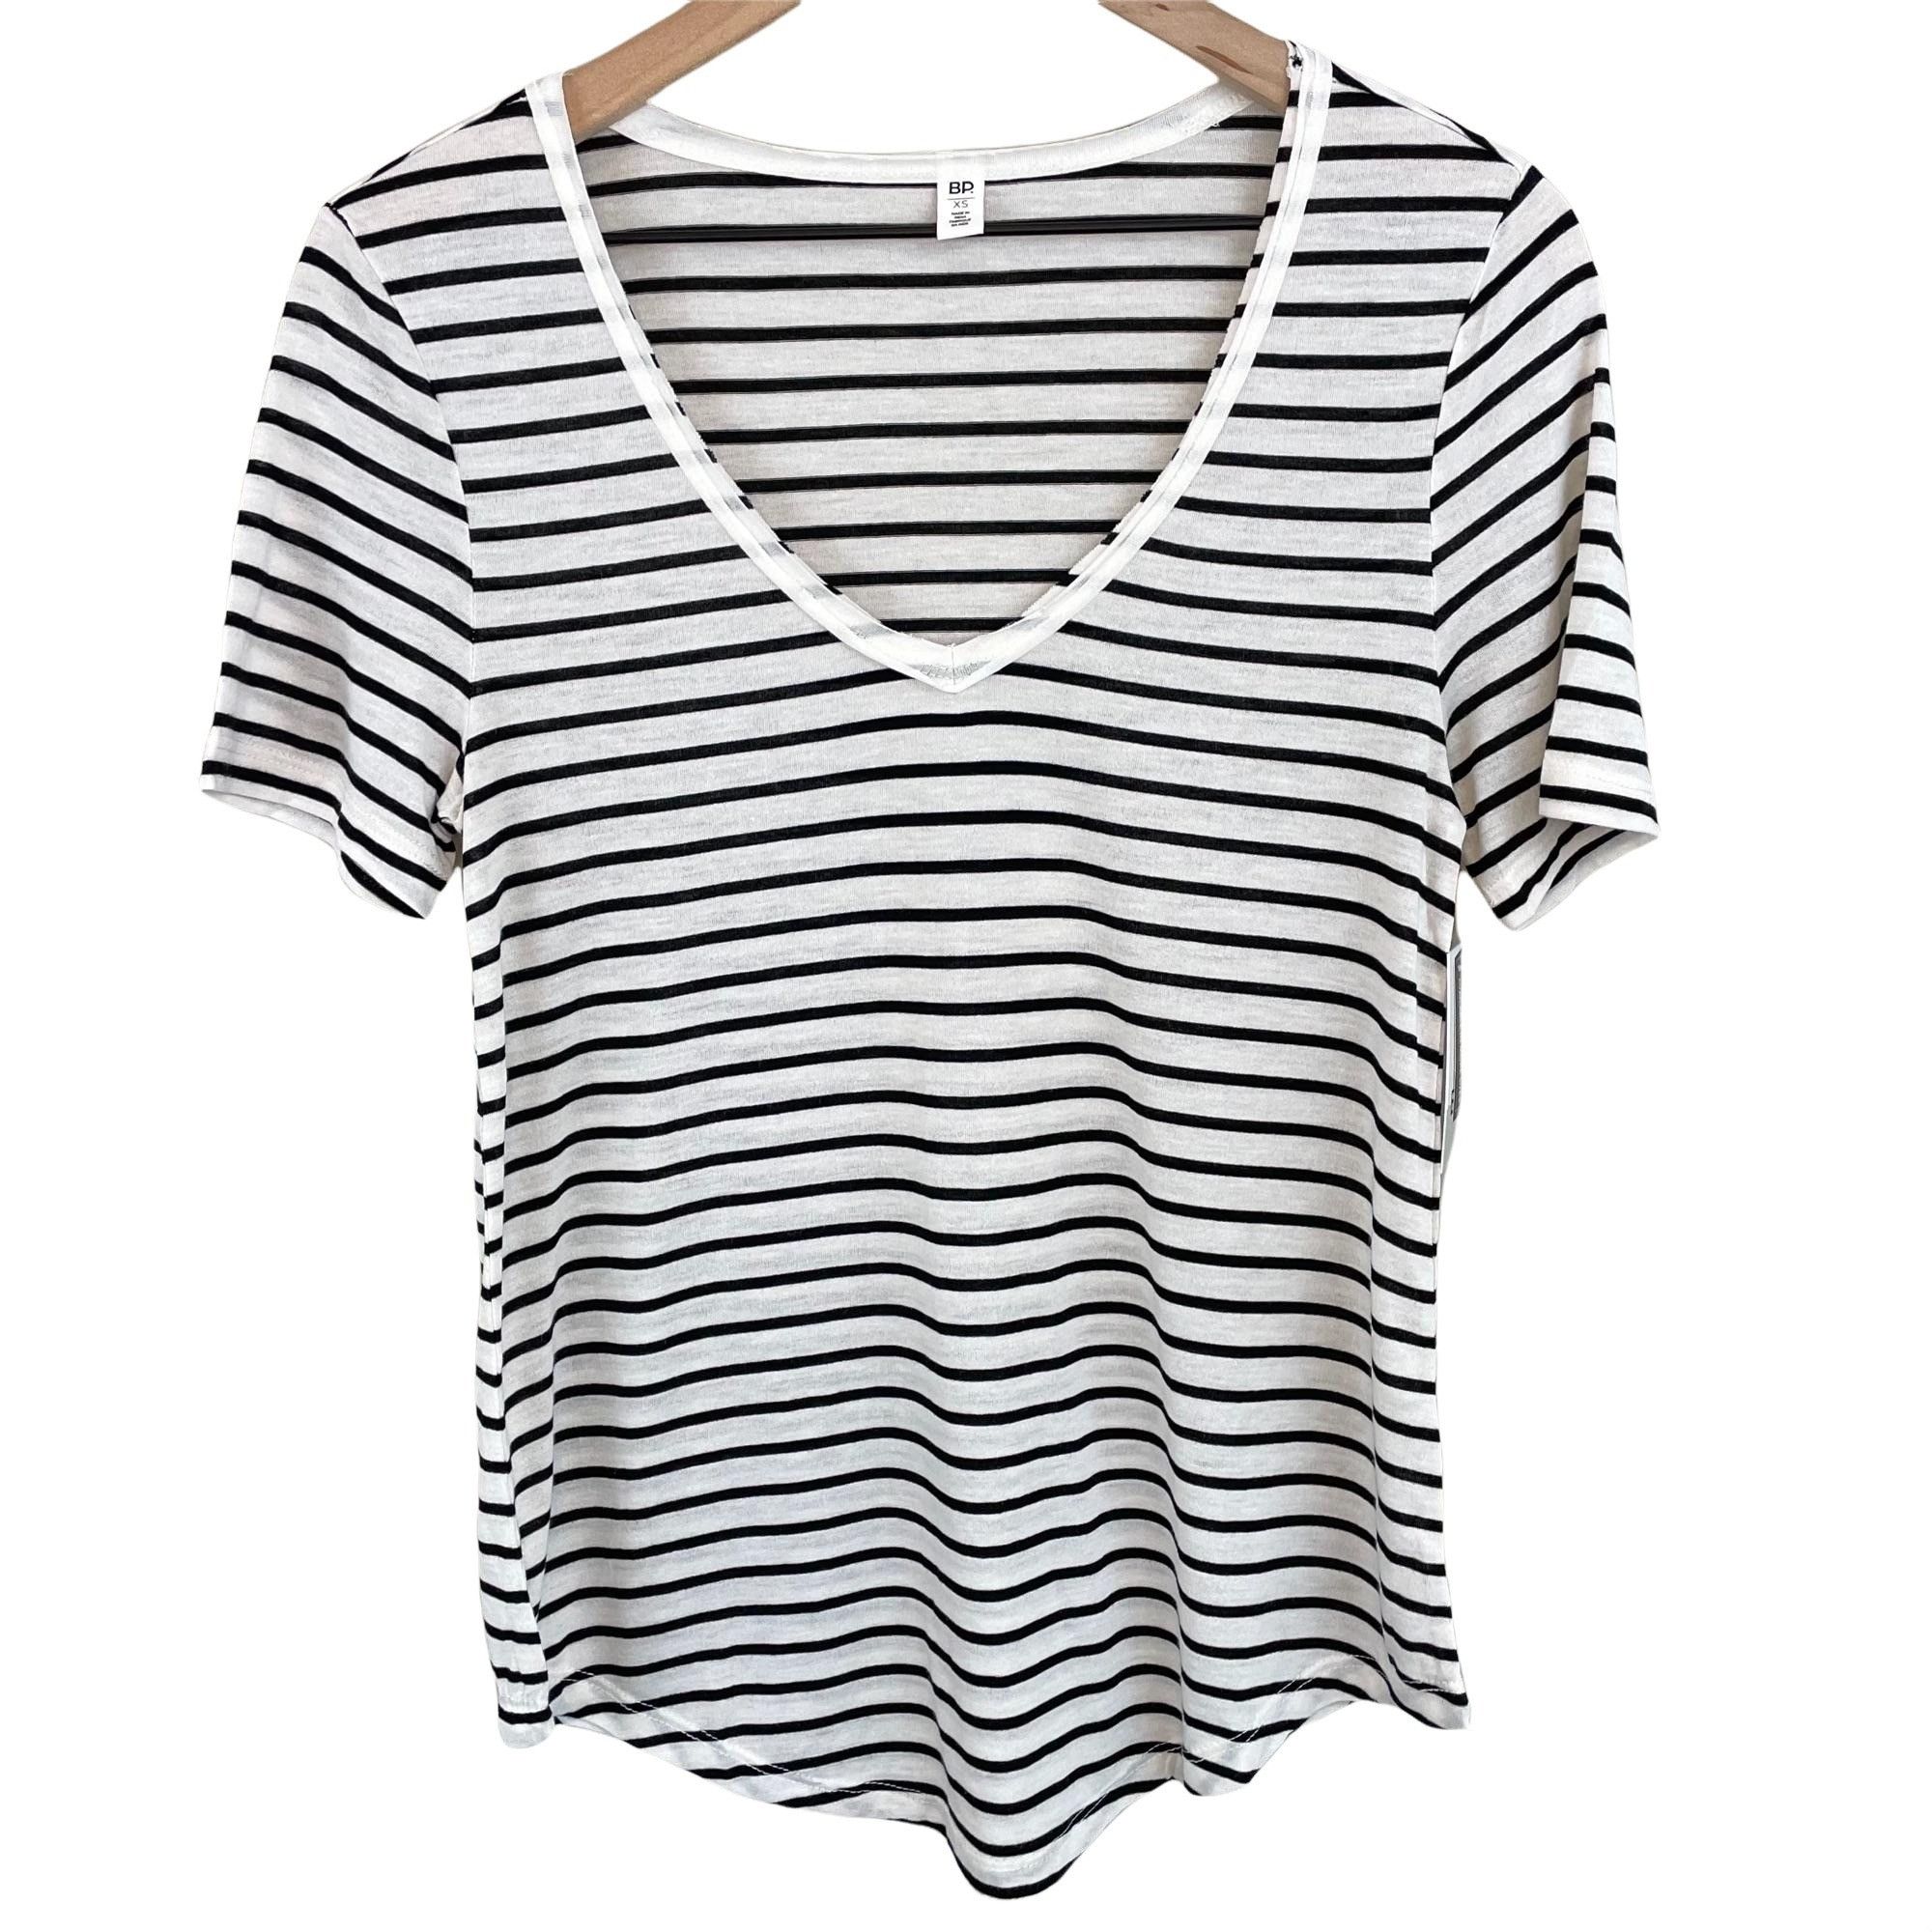 BP bp white ivory black striped raw edge v-neck tee extra small Size XS / US 0-2 / IT 36-38 - 12 Preview